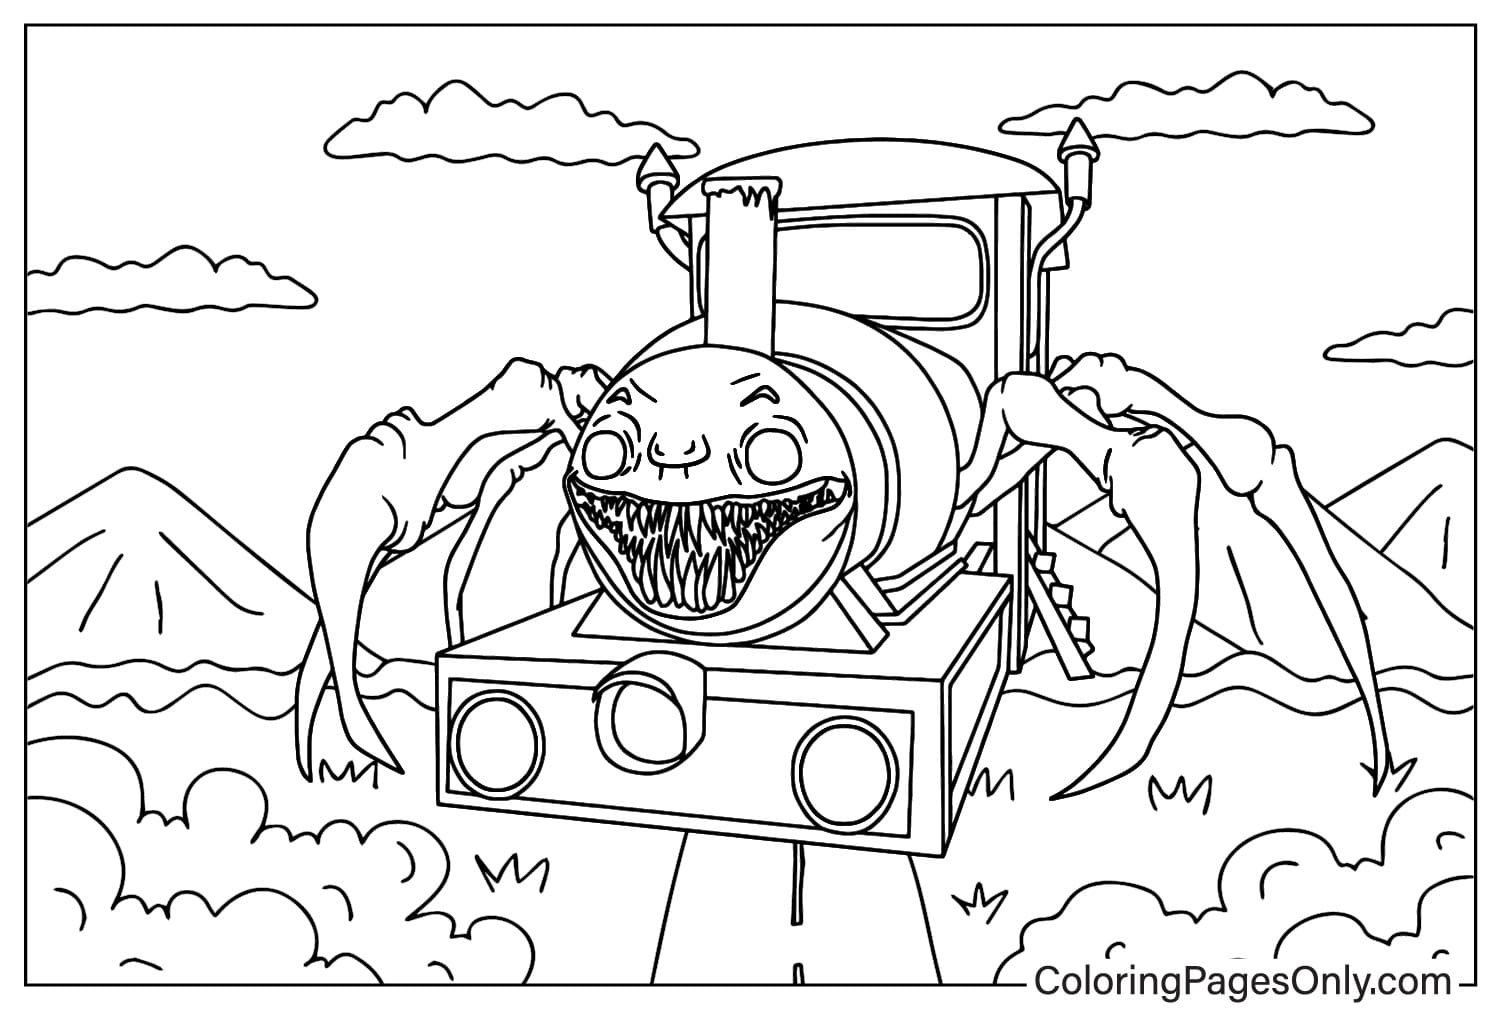 Choo-Choo Charles Coloring Sheet for Kids - Free Printable Coloring Pages